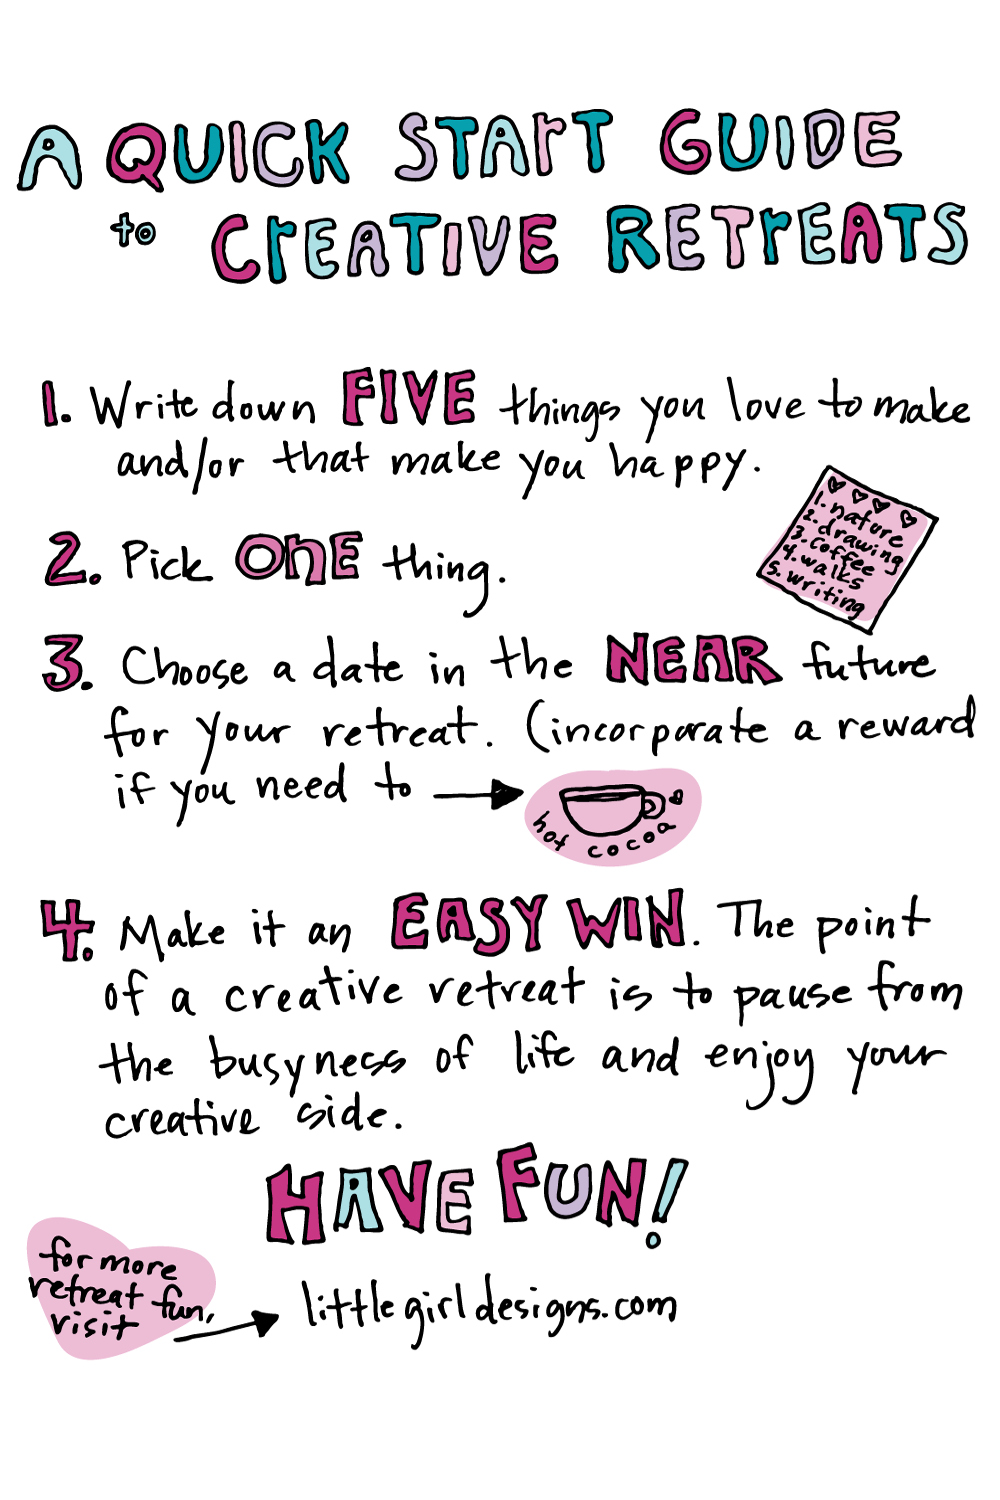 Creative Retreat 101 - Have you ever wondered what a creative retreat is or how in the world you could take one with your current schedule? Click this image to see my video blog on how to get started TODAY with taking creative retreats. You are going to LOVE these!